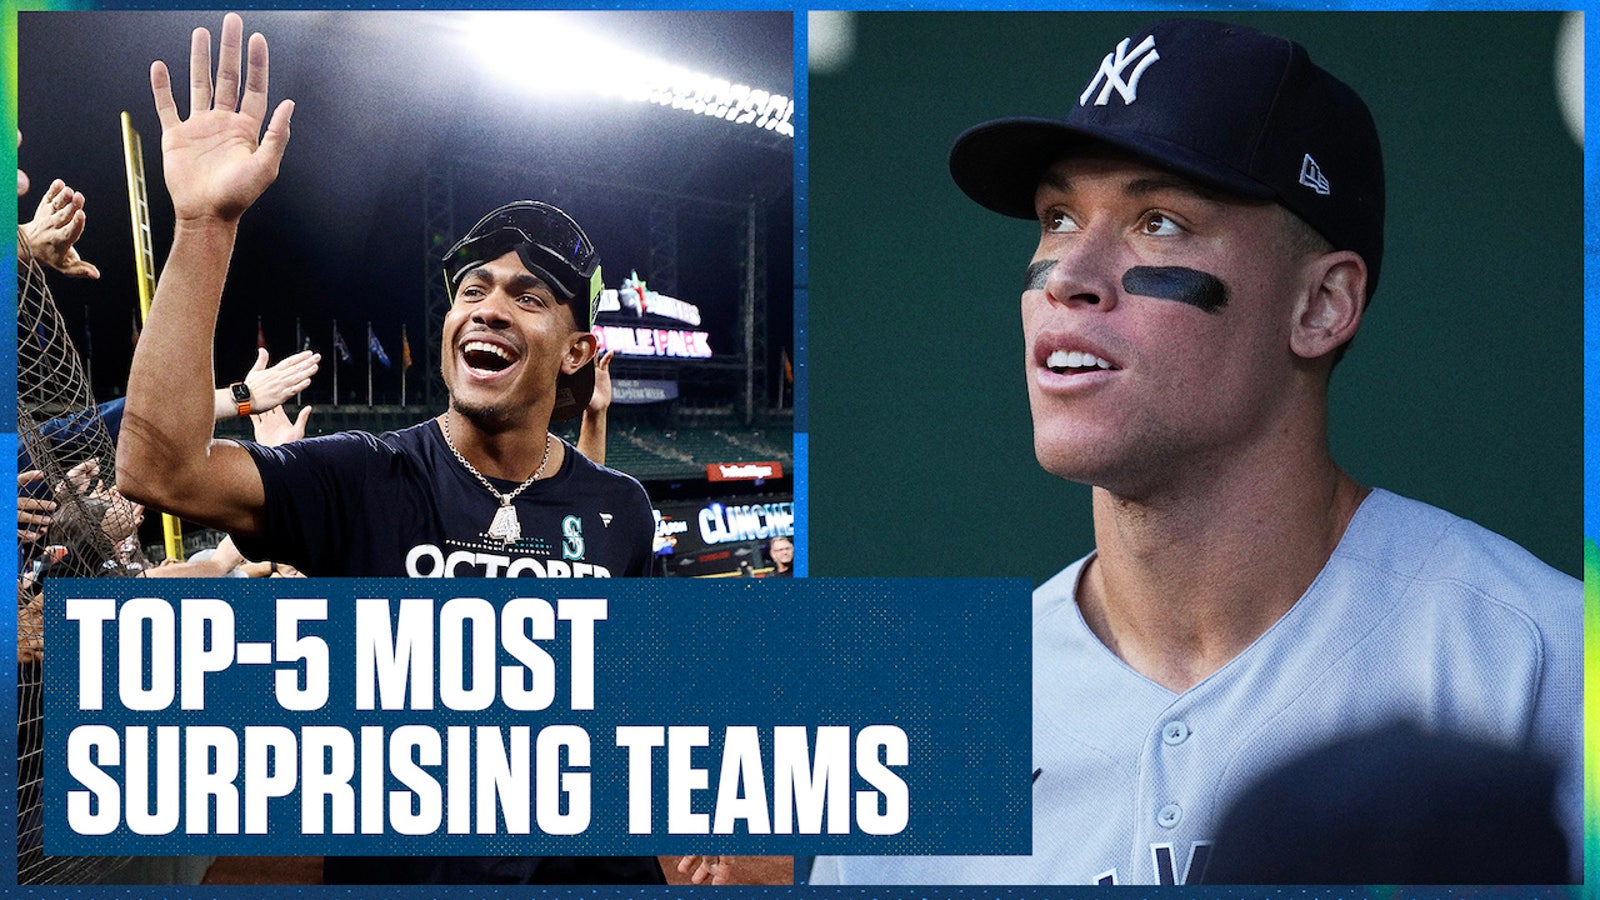 MLB on FOX - Here are the winners by division & our finalists! Now